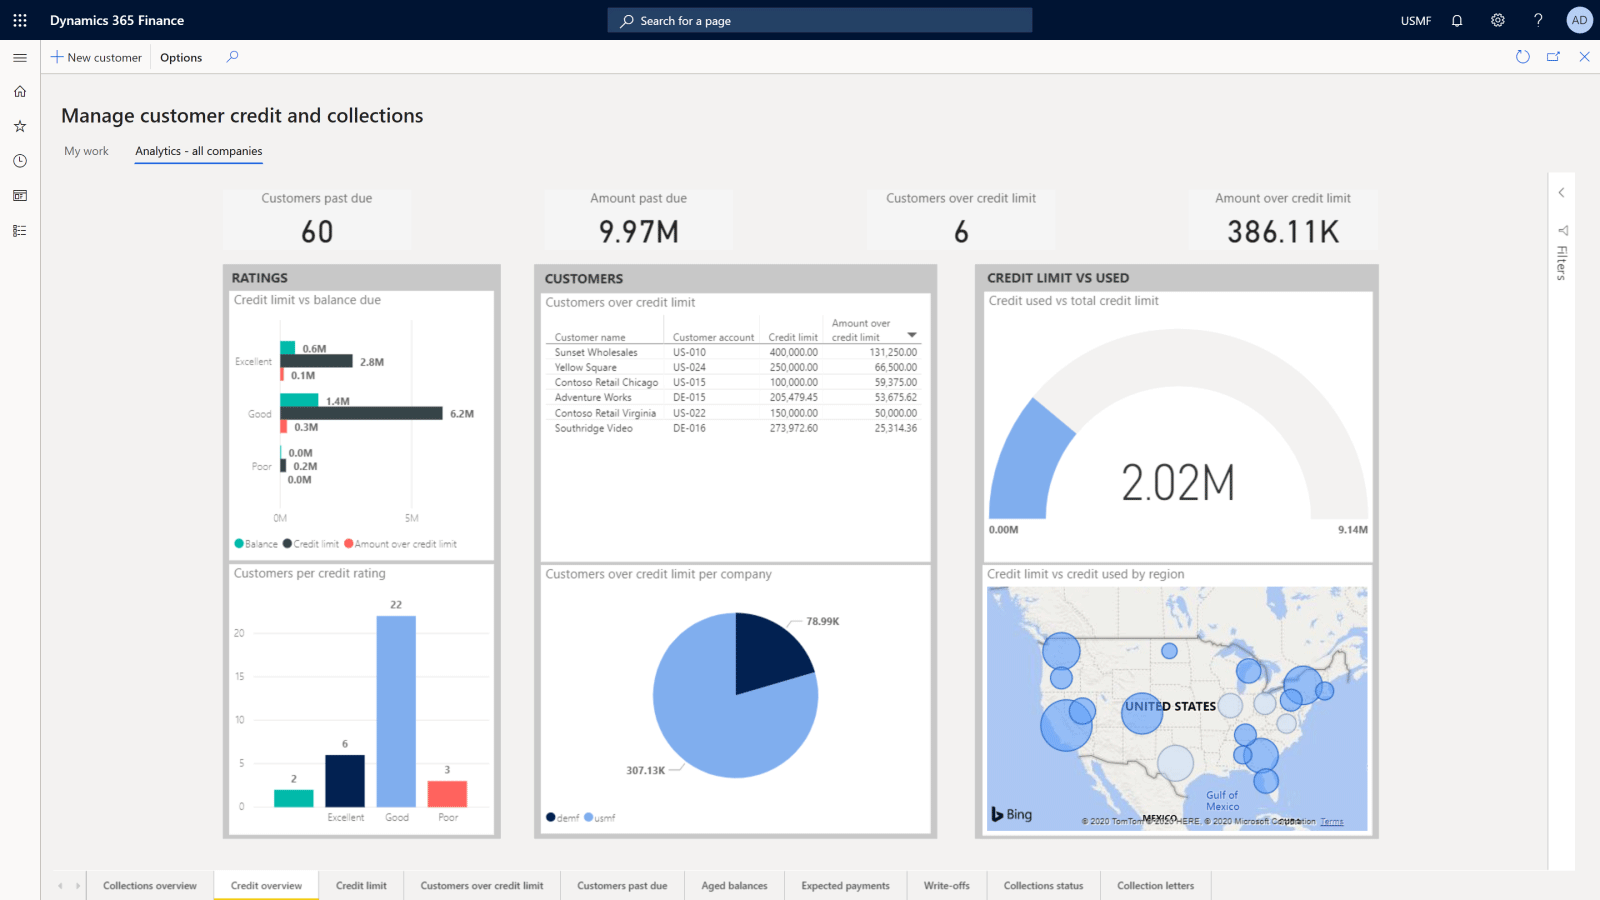 Microsoft Dynamics 365 Finance Unify and automate your business processes